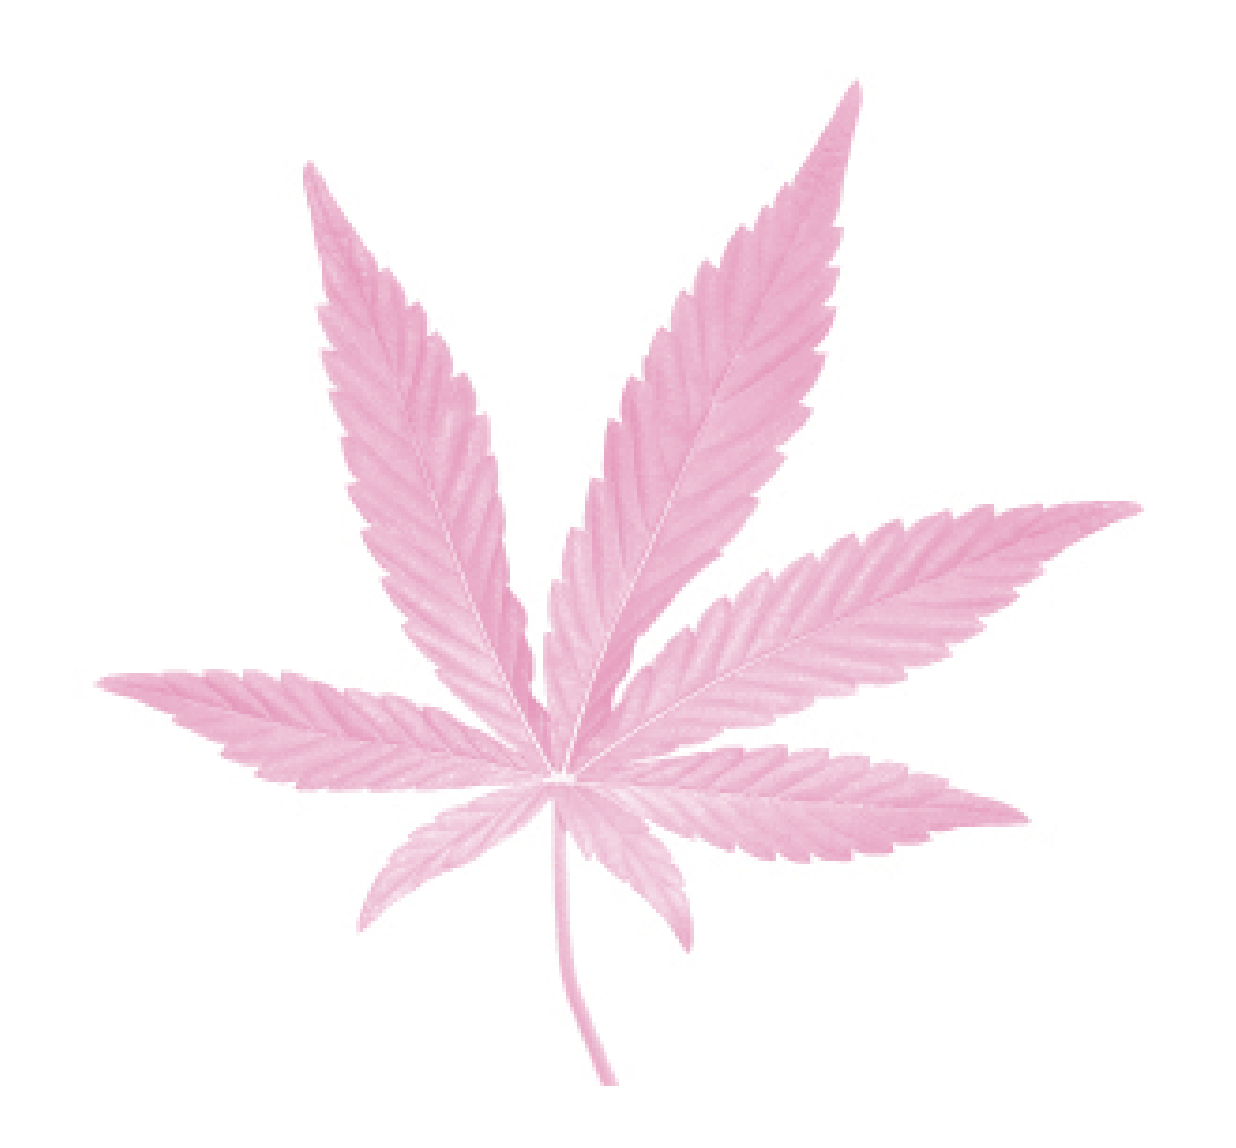 Medical marijuana gives new relief after breast surgery